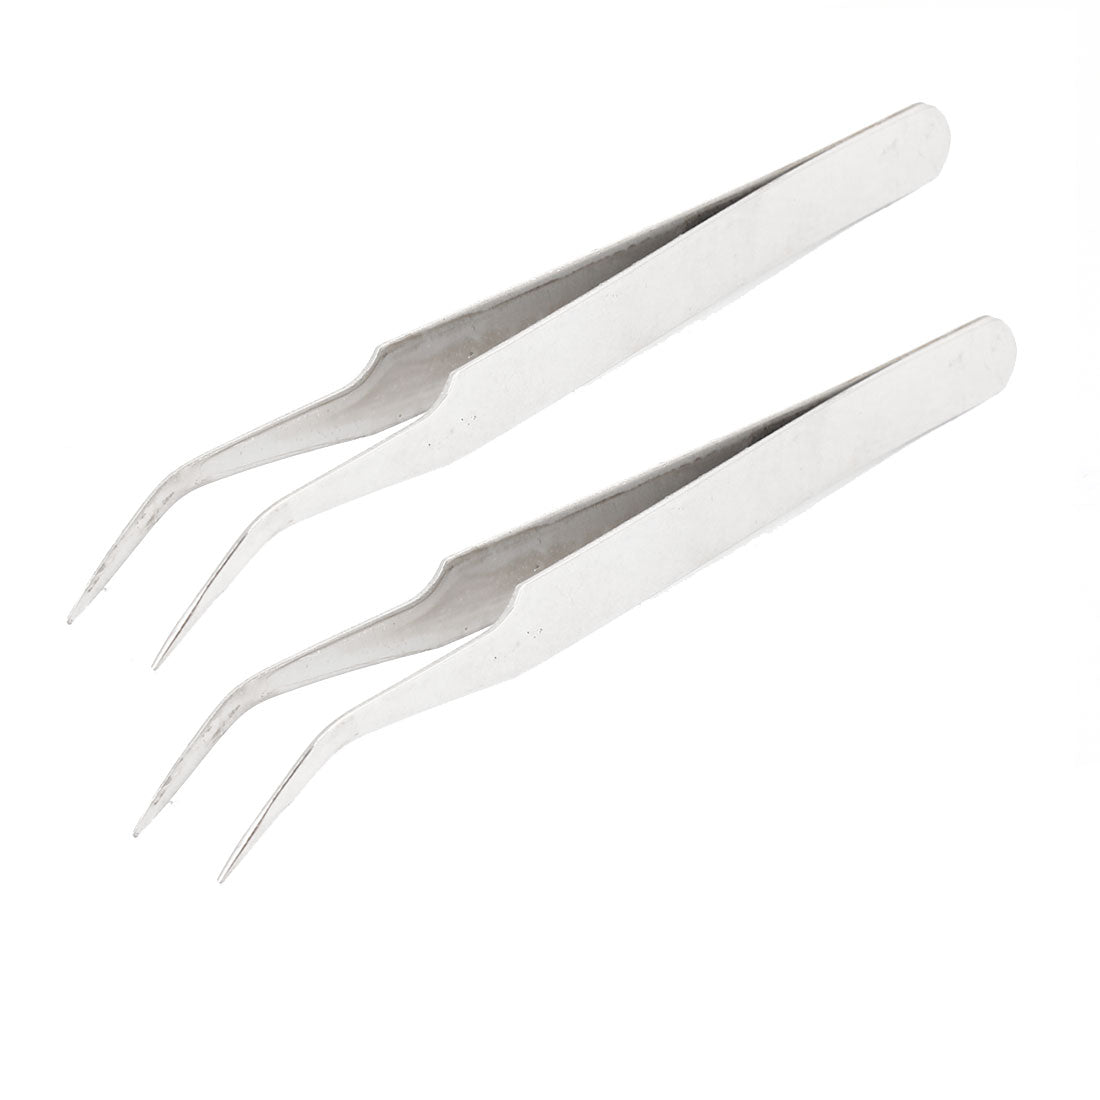 uxcell Uxcell 2 Pcs ST-15 120mm Long Metal Hand Tool Pincers Curved Tweezers Silver Tone